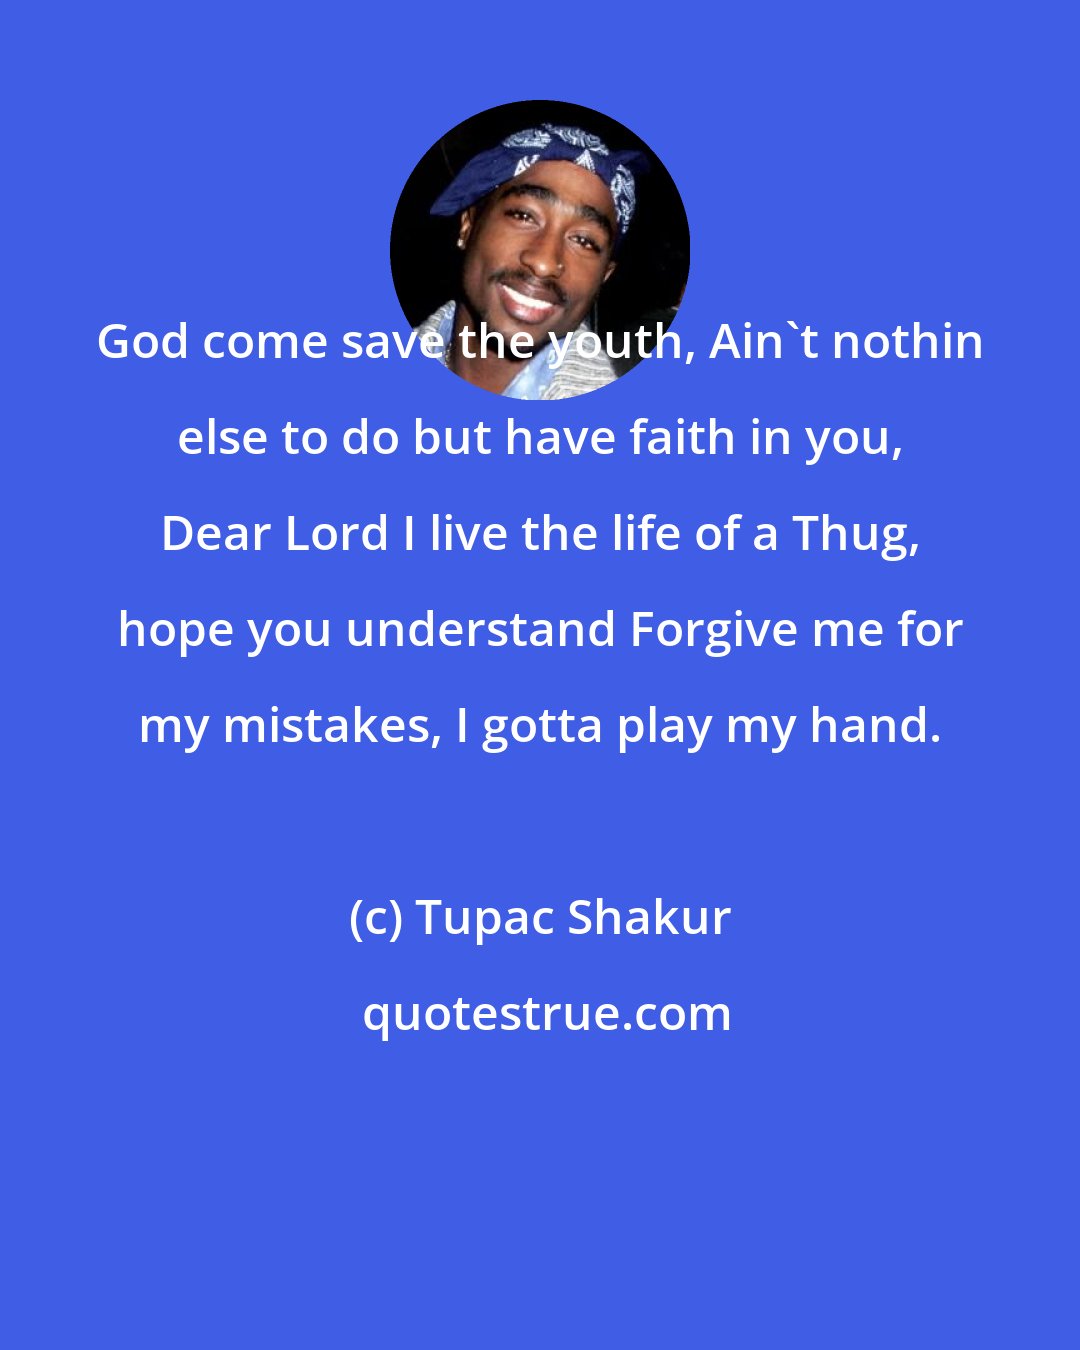 Tupac Shakur: God come save the youth, Ain't nothin else to do but have faith in you, Dear Lord I live the life of a Thug, hope you understand Forgive me for my mistakes, I gotta play my hand.